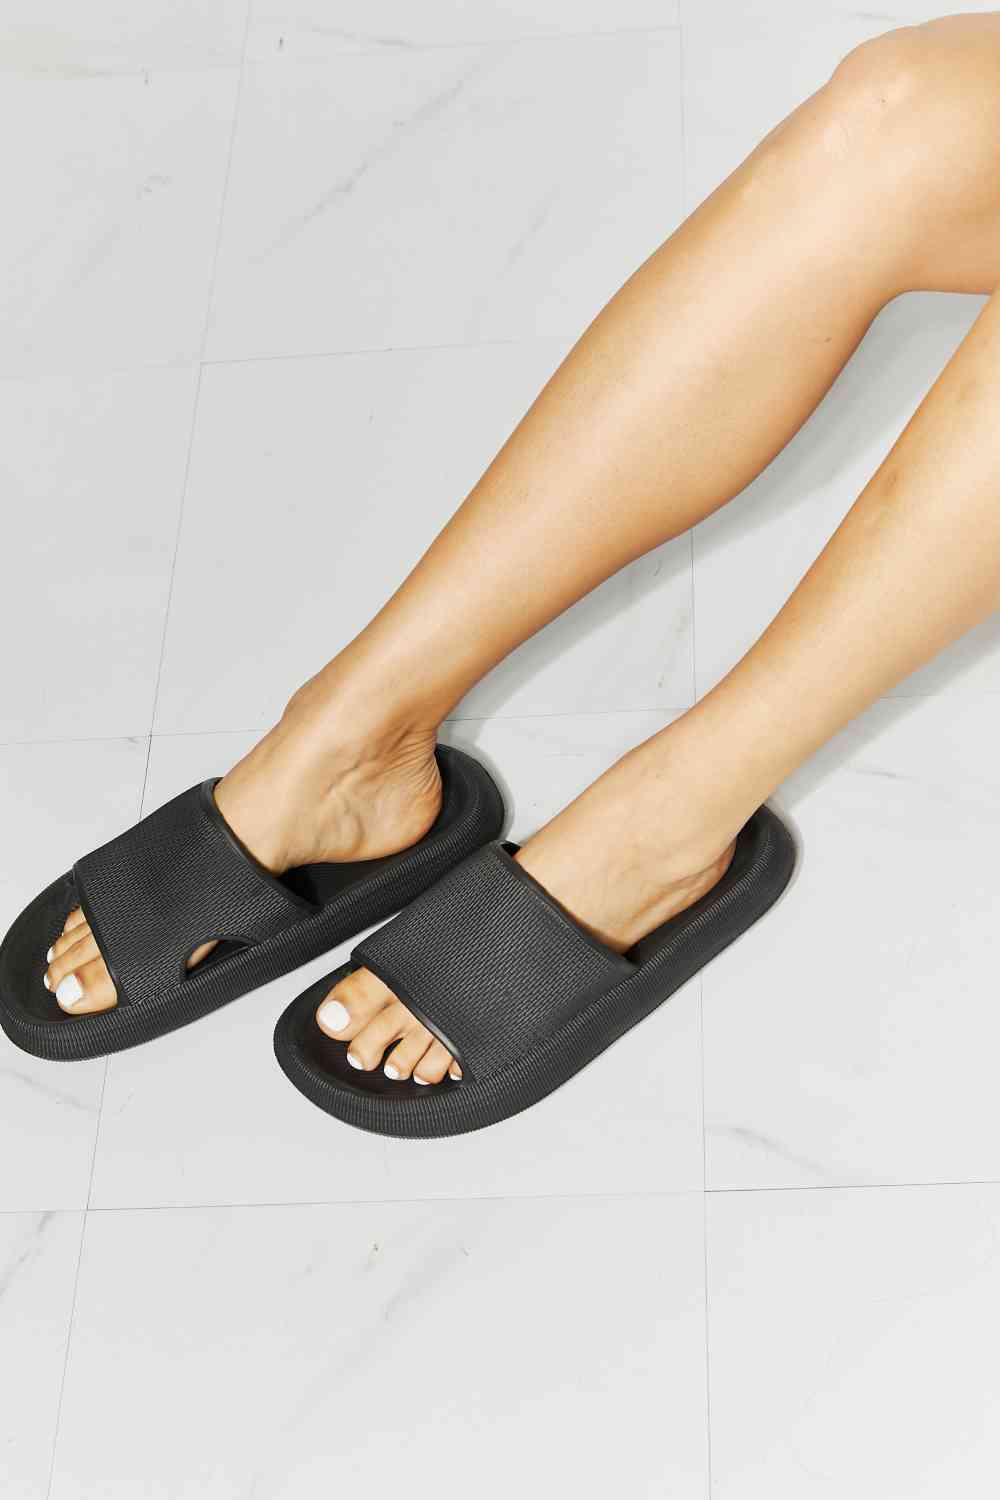 Arms Around Me Open Toe Slide in Black - Accessories - Shoes - 3 - 2024